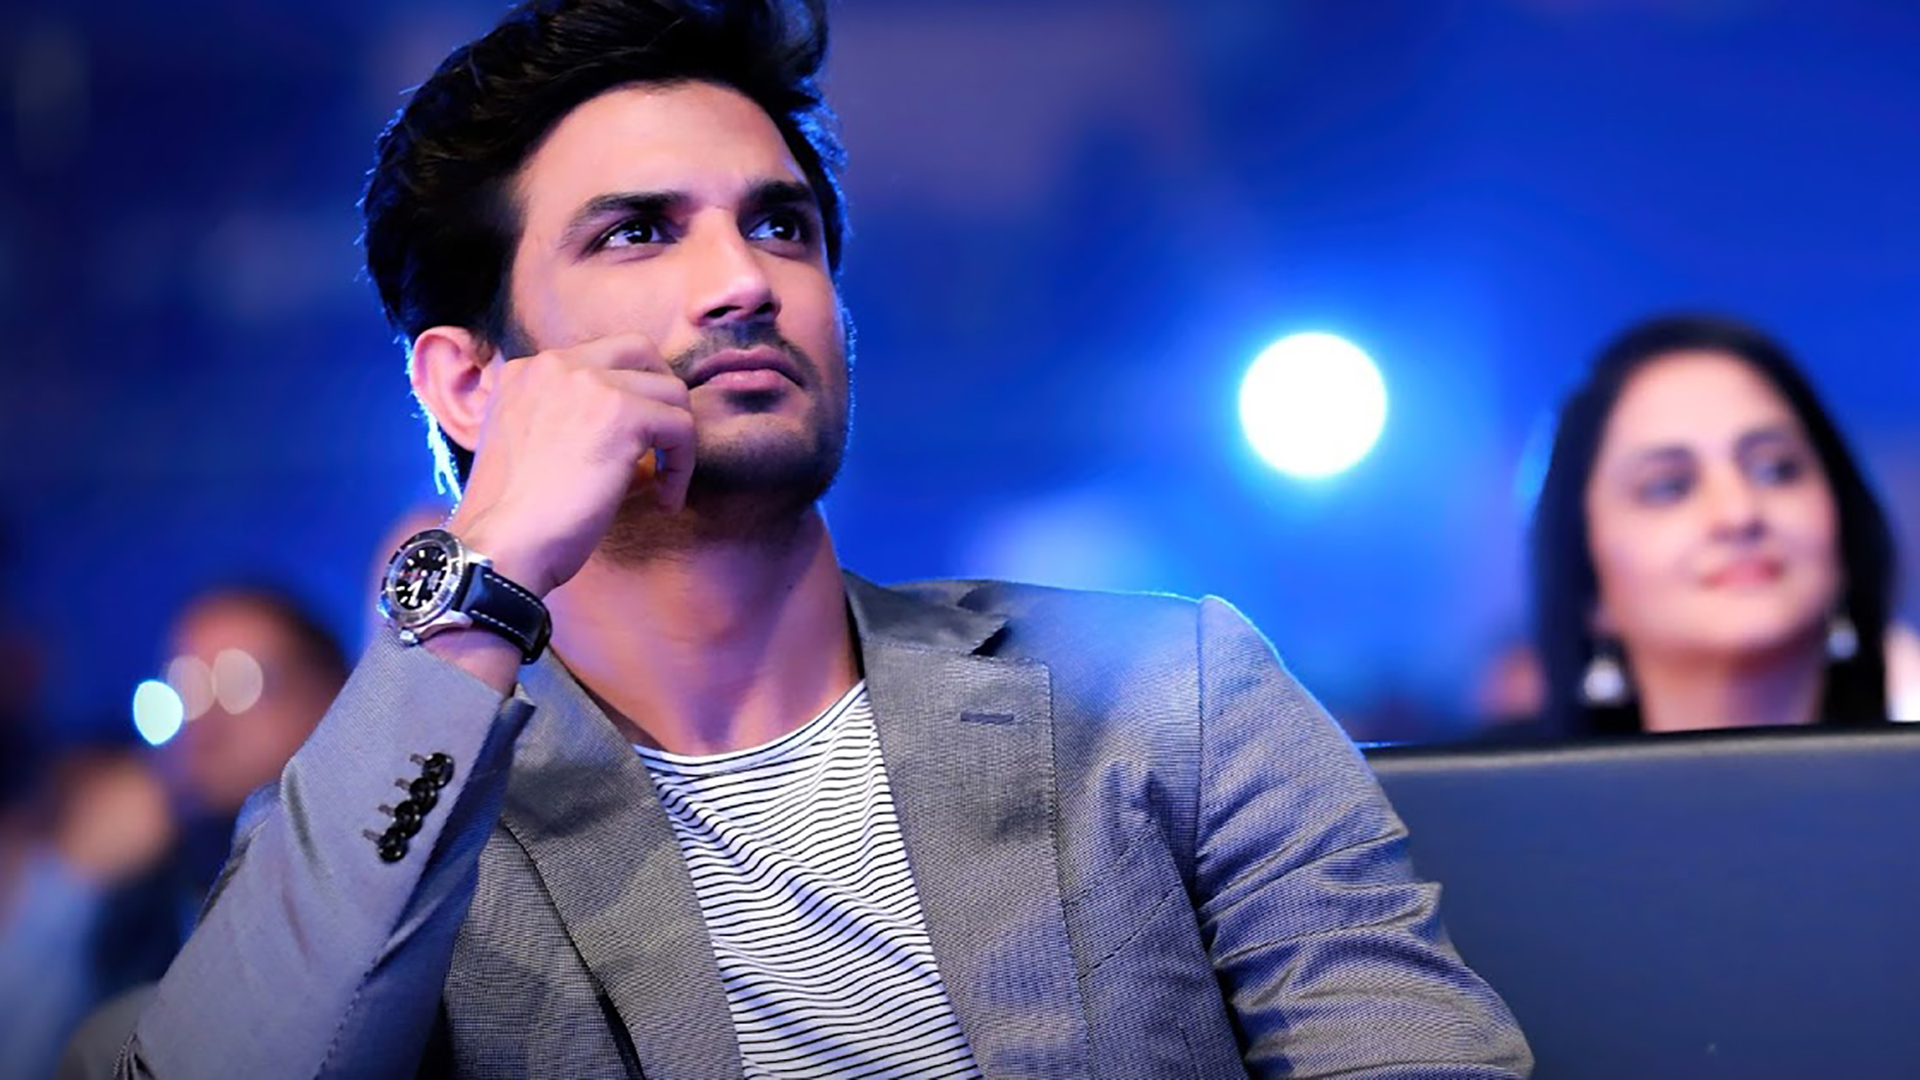 Sushant Is Wearing Black White Striped T-Shirt And Ash Overcoat In Blue Wallpaper HD Sushant Singh Rajput